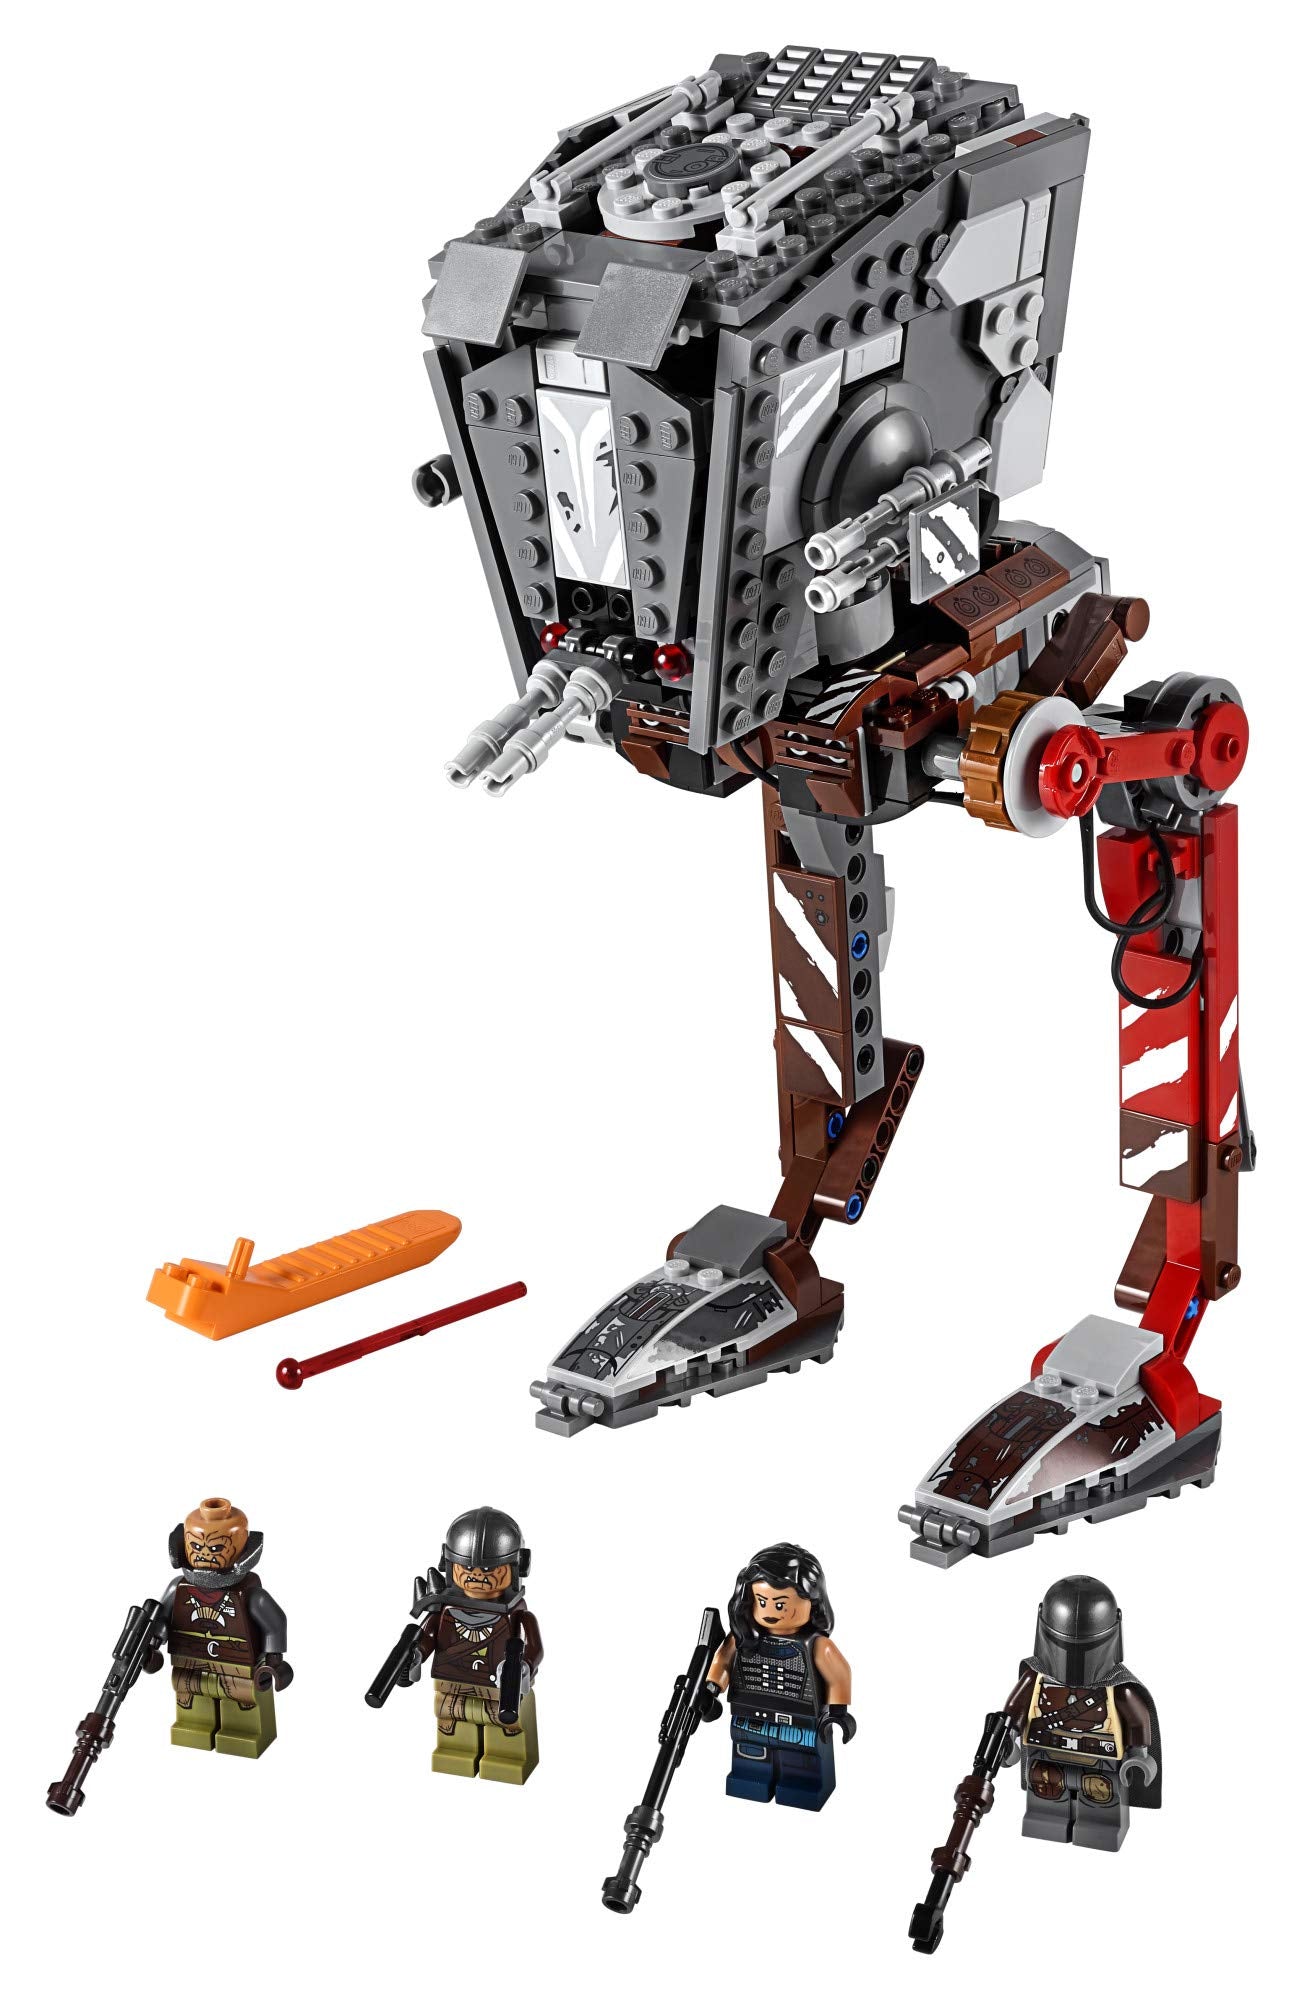 LEGO Star Wars at-ST Raider 75254 The Mandalorian Collectible All Terrain Scout Transport Walker Posable Building Model (540 Pieces)